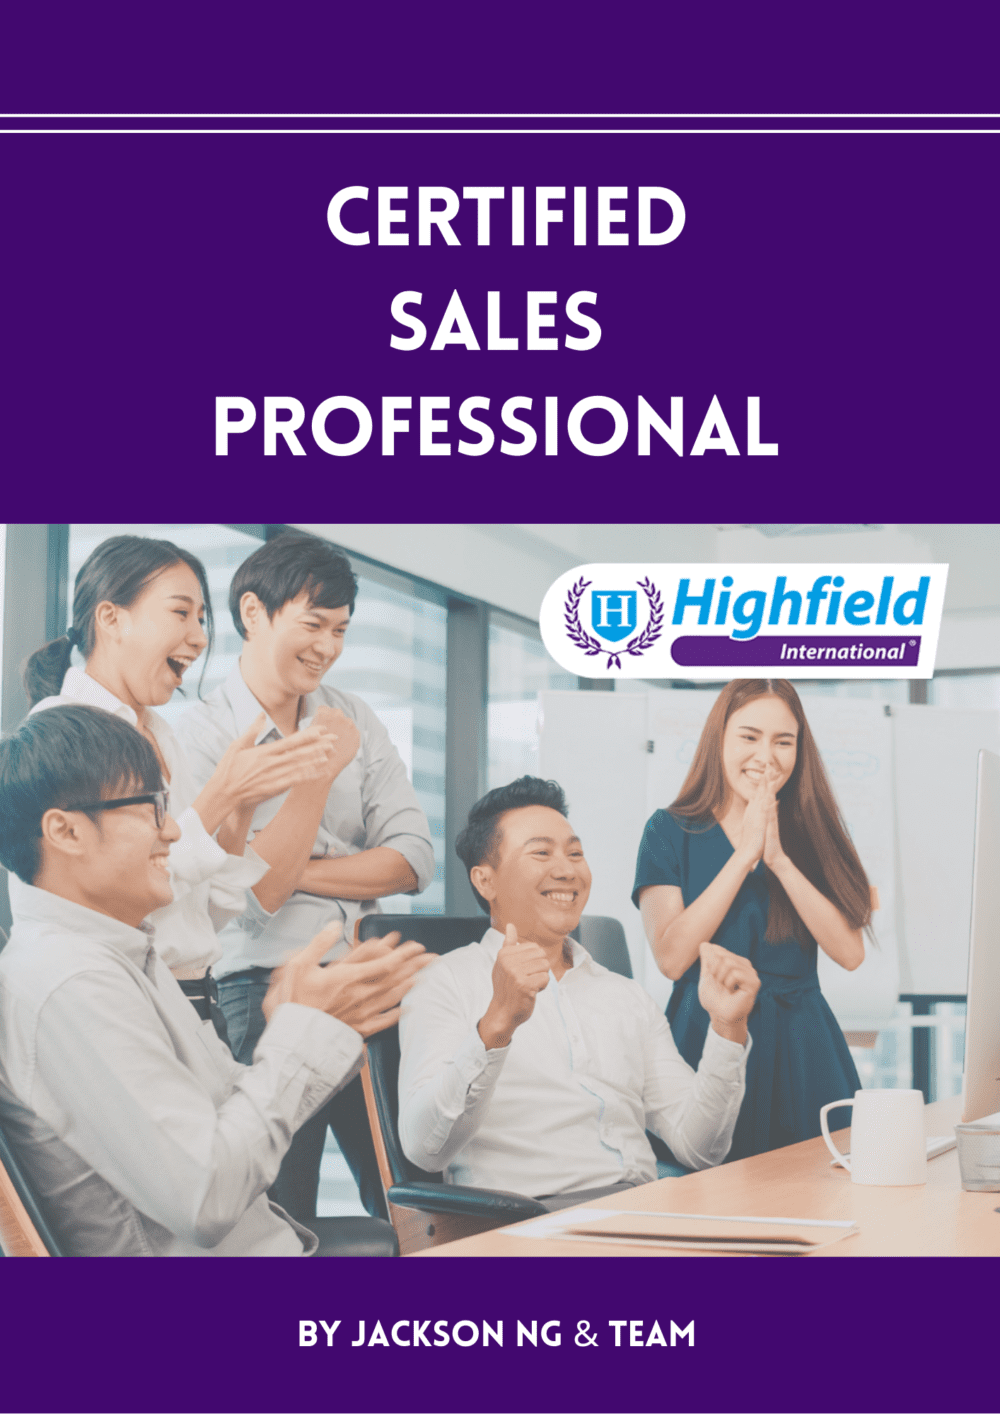 Certification Programs - Certified Sales Professional